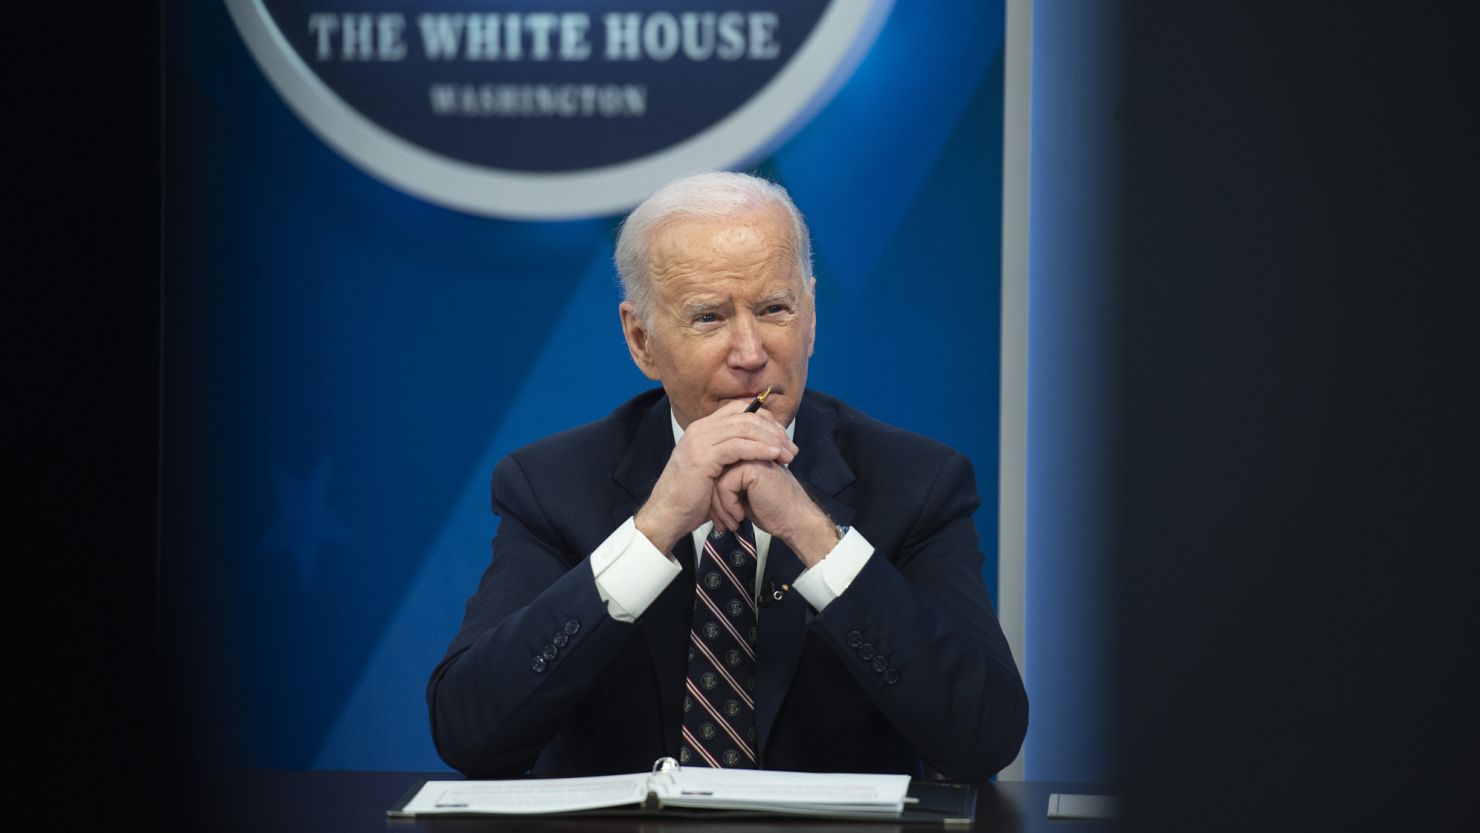 President Joe Biden speaks from the White House on Tuesday during a virtual event discussing securing critical mineral supply chains, powering clean energy manufacturing and creating good-paying jobs.